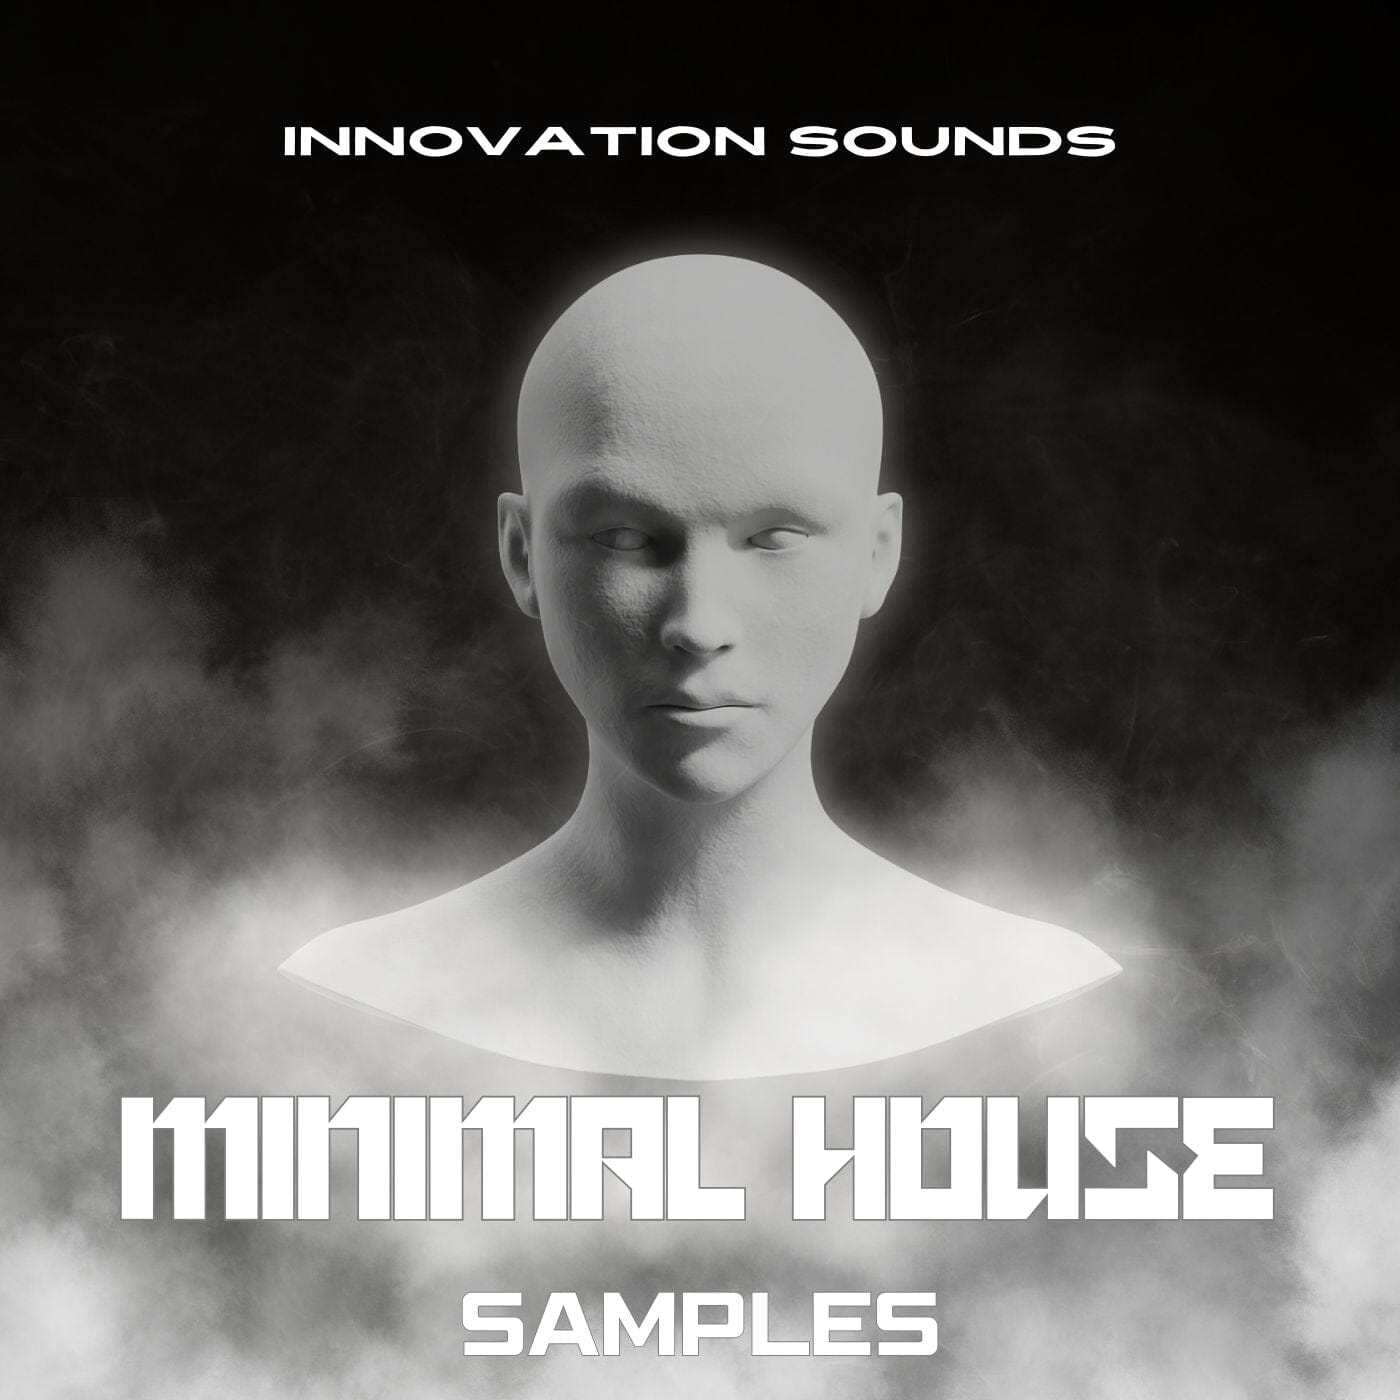 Minimal House Samples - Techno Loops and Midi Sample Pack Innovation Sounds